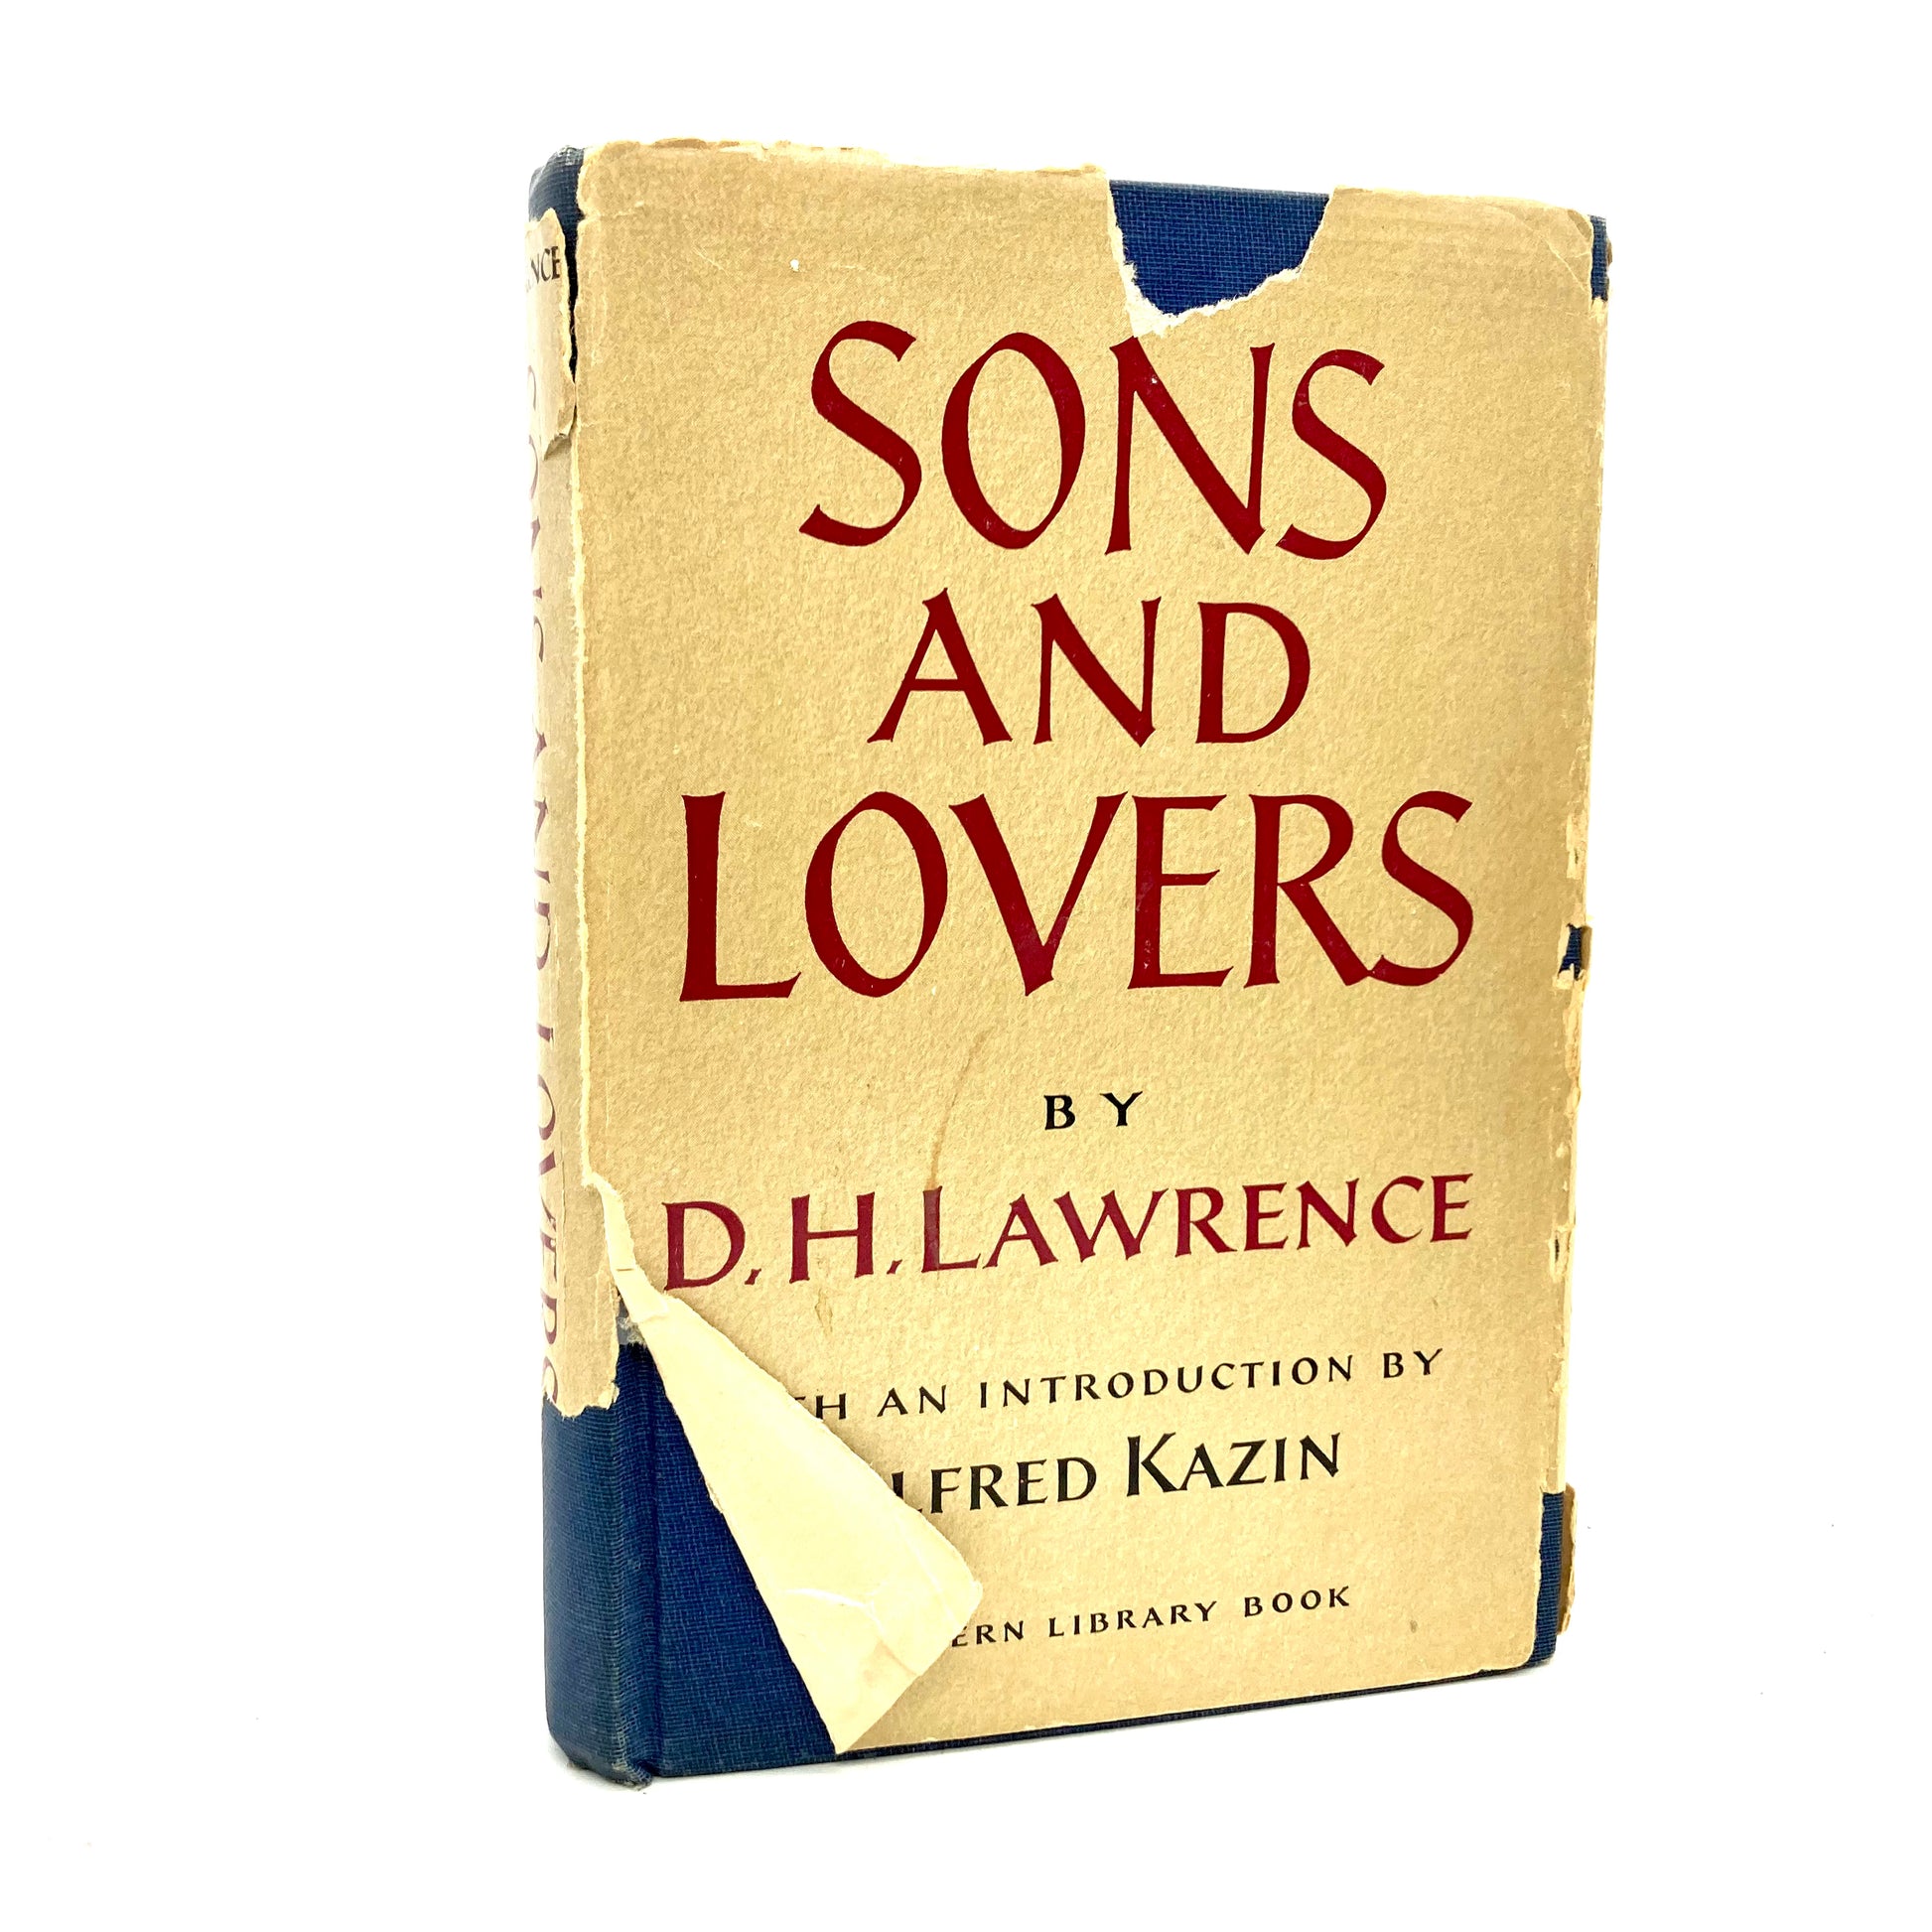 LAWRENCE, D.H. "Sons and Lovers by DH Lawrence [Modern Library, 1962] - Buzz Bookstore